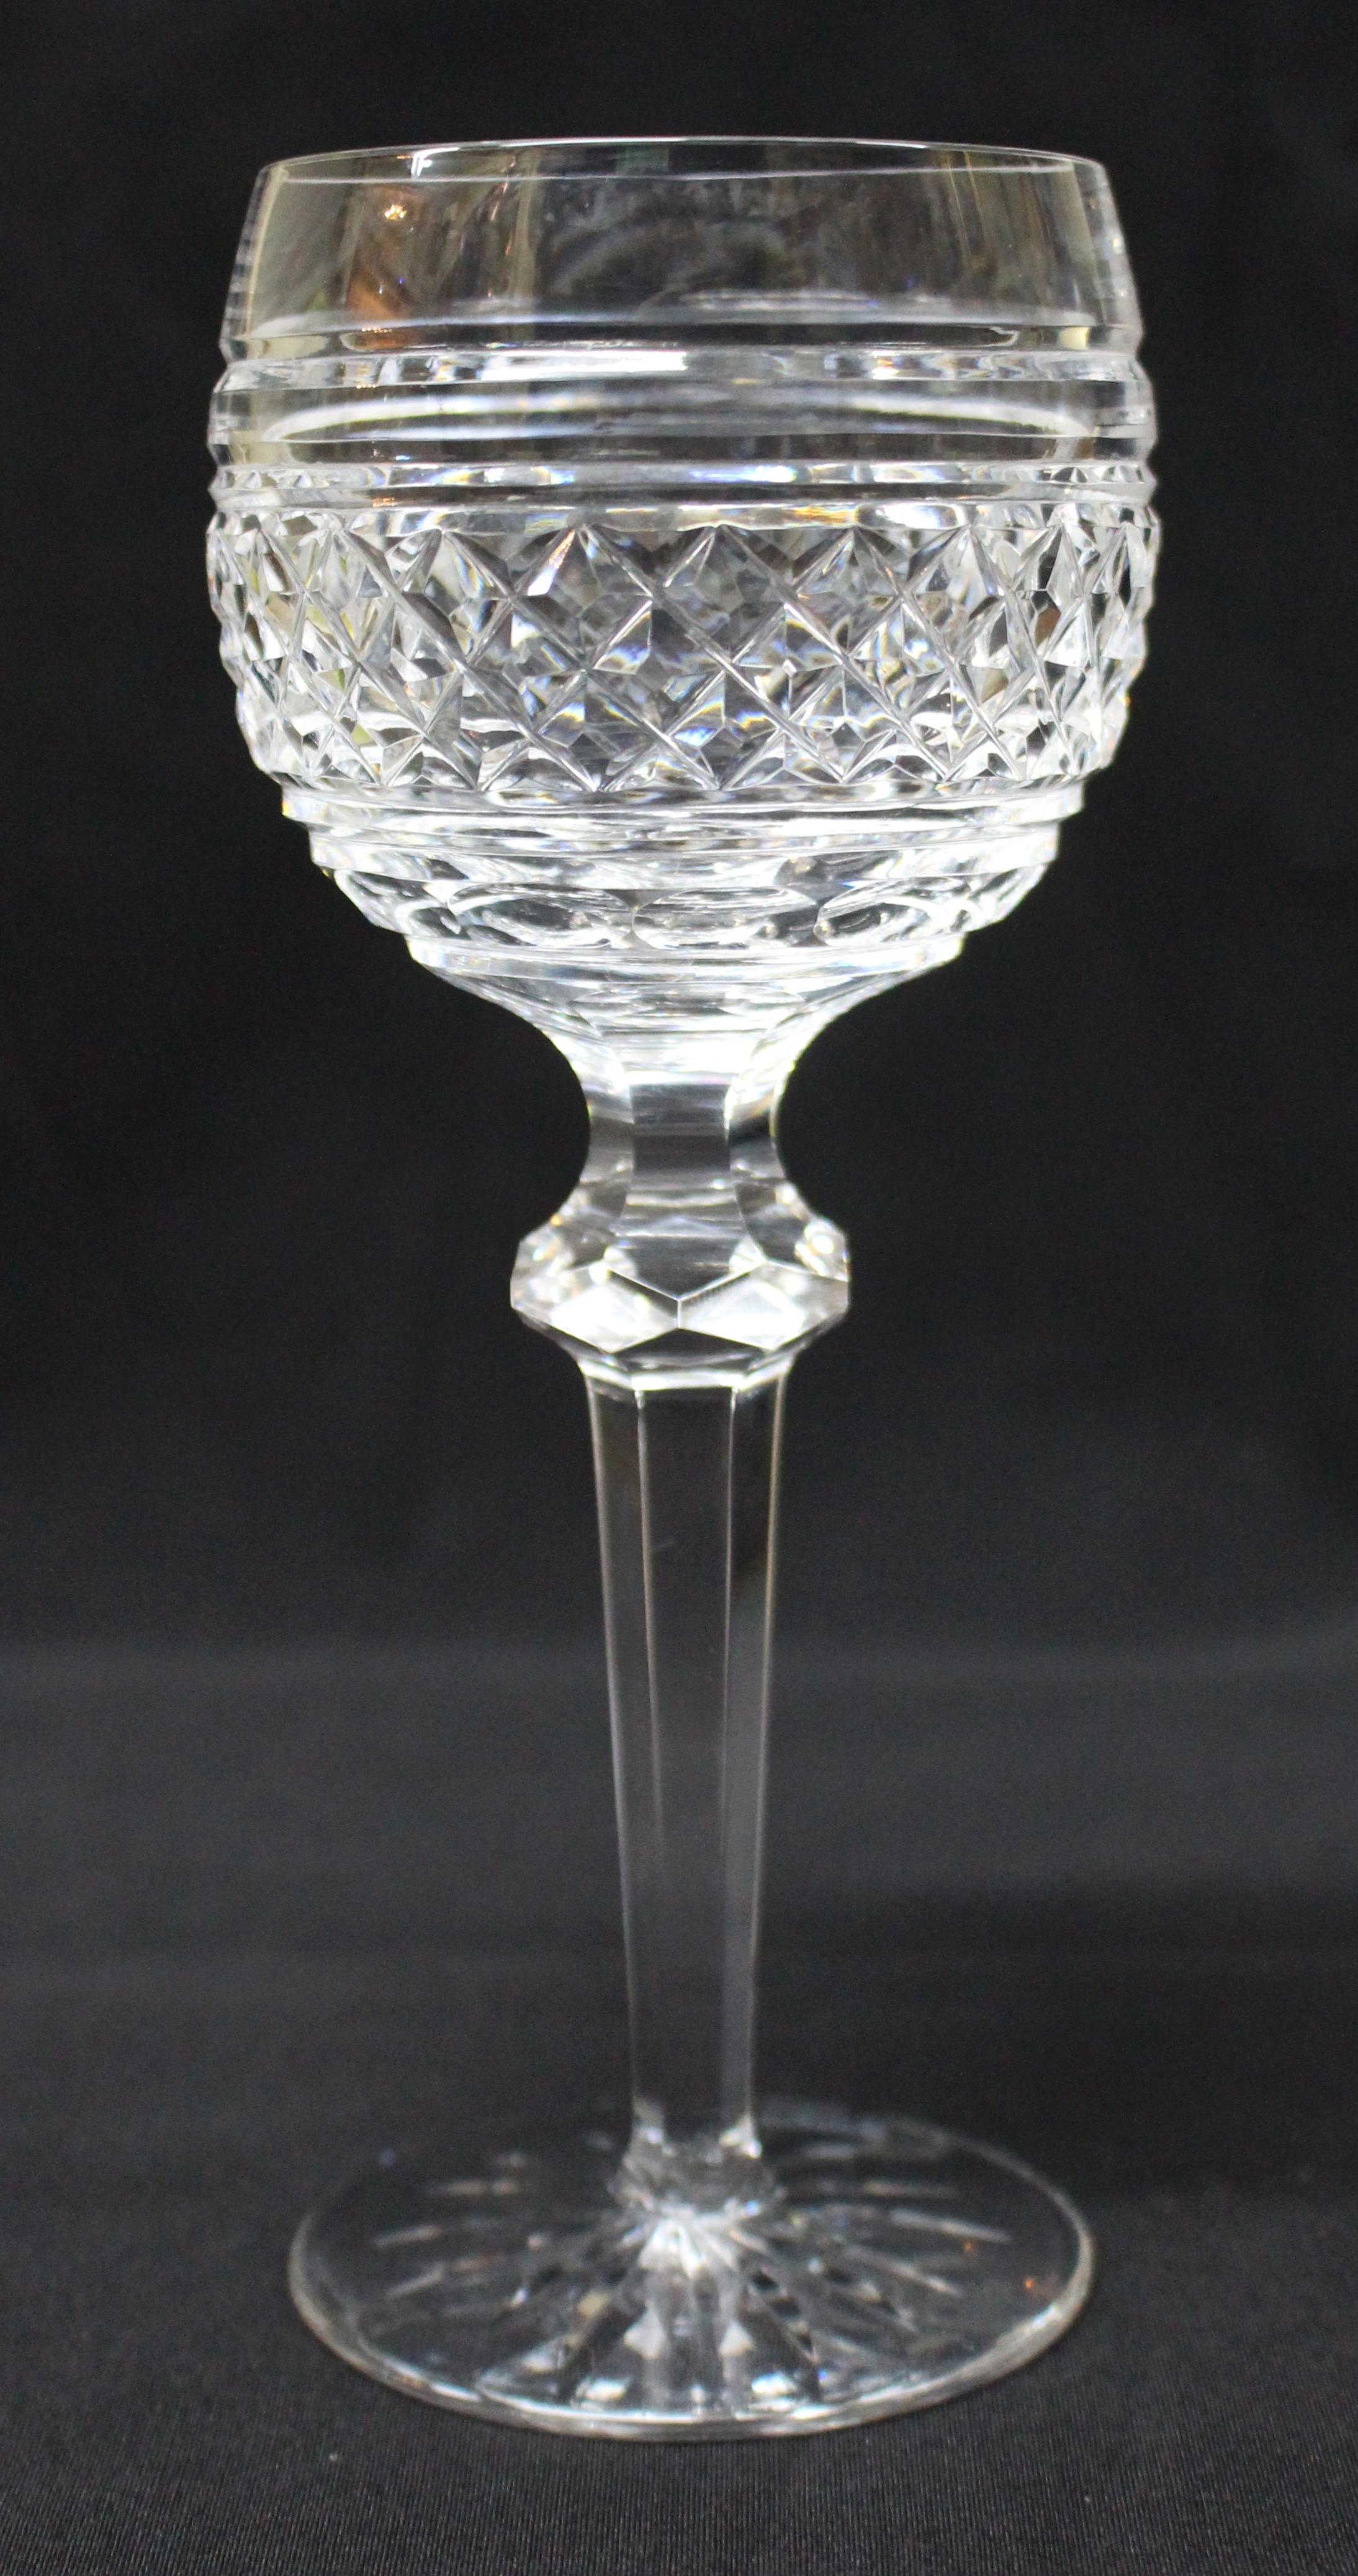 Period circa 1950
Manufacturer Waterford, made in Ireland
Type wine glasses
Set of six 
Top diameter 7.5 cm / 3 in
Height 19 cm / 7 1/2 in




Very attractive set of vintage Irish crystal hock wine glasses by Waterford





UK